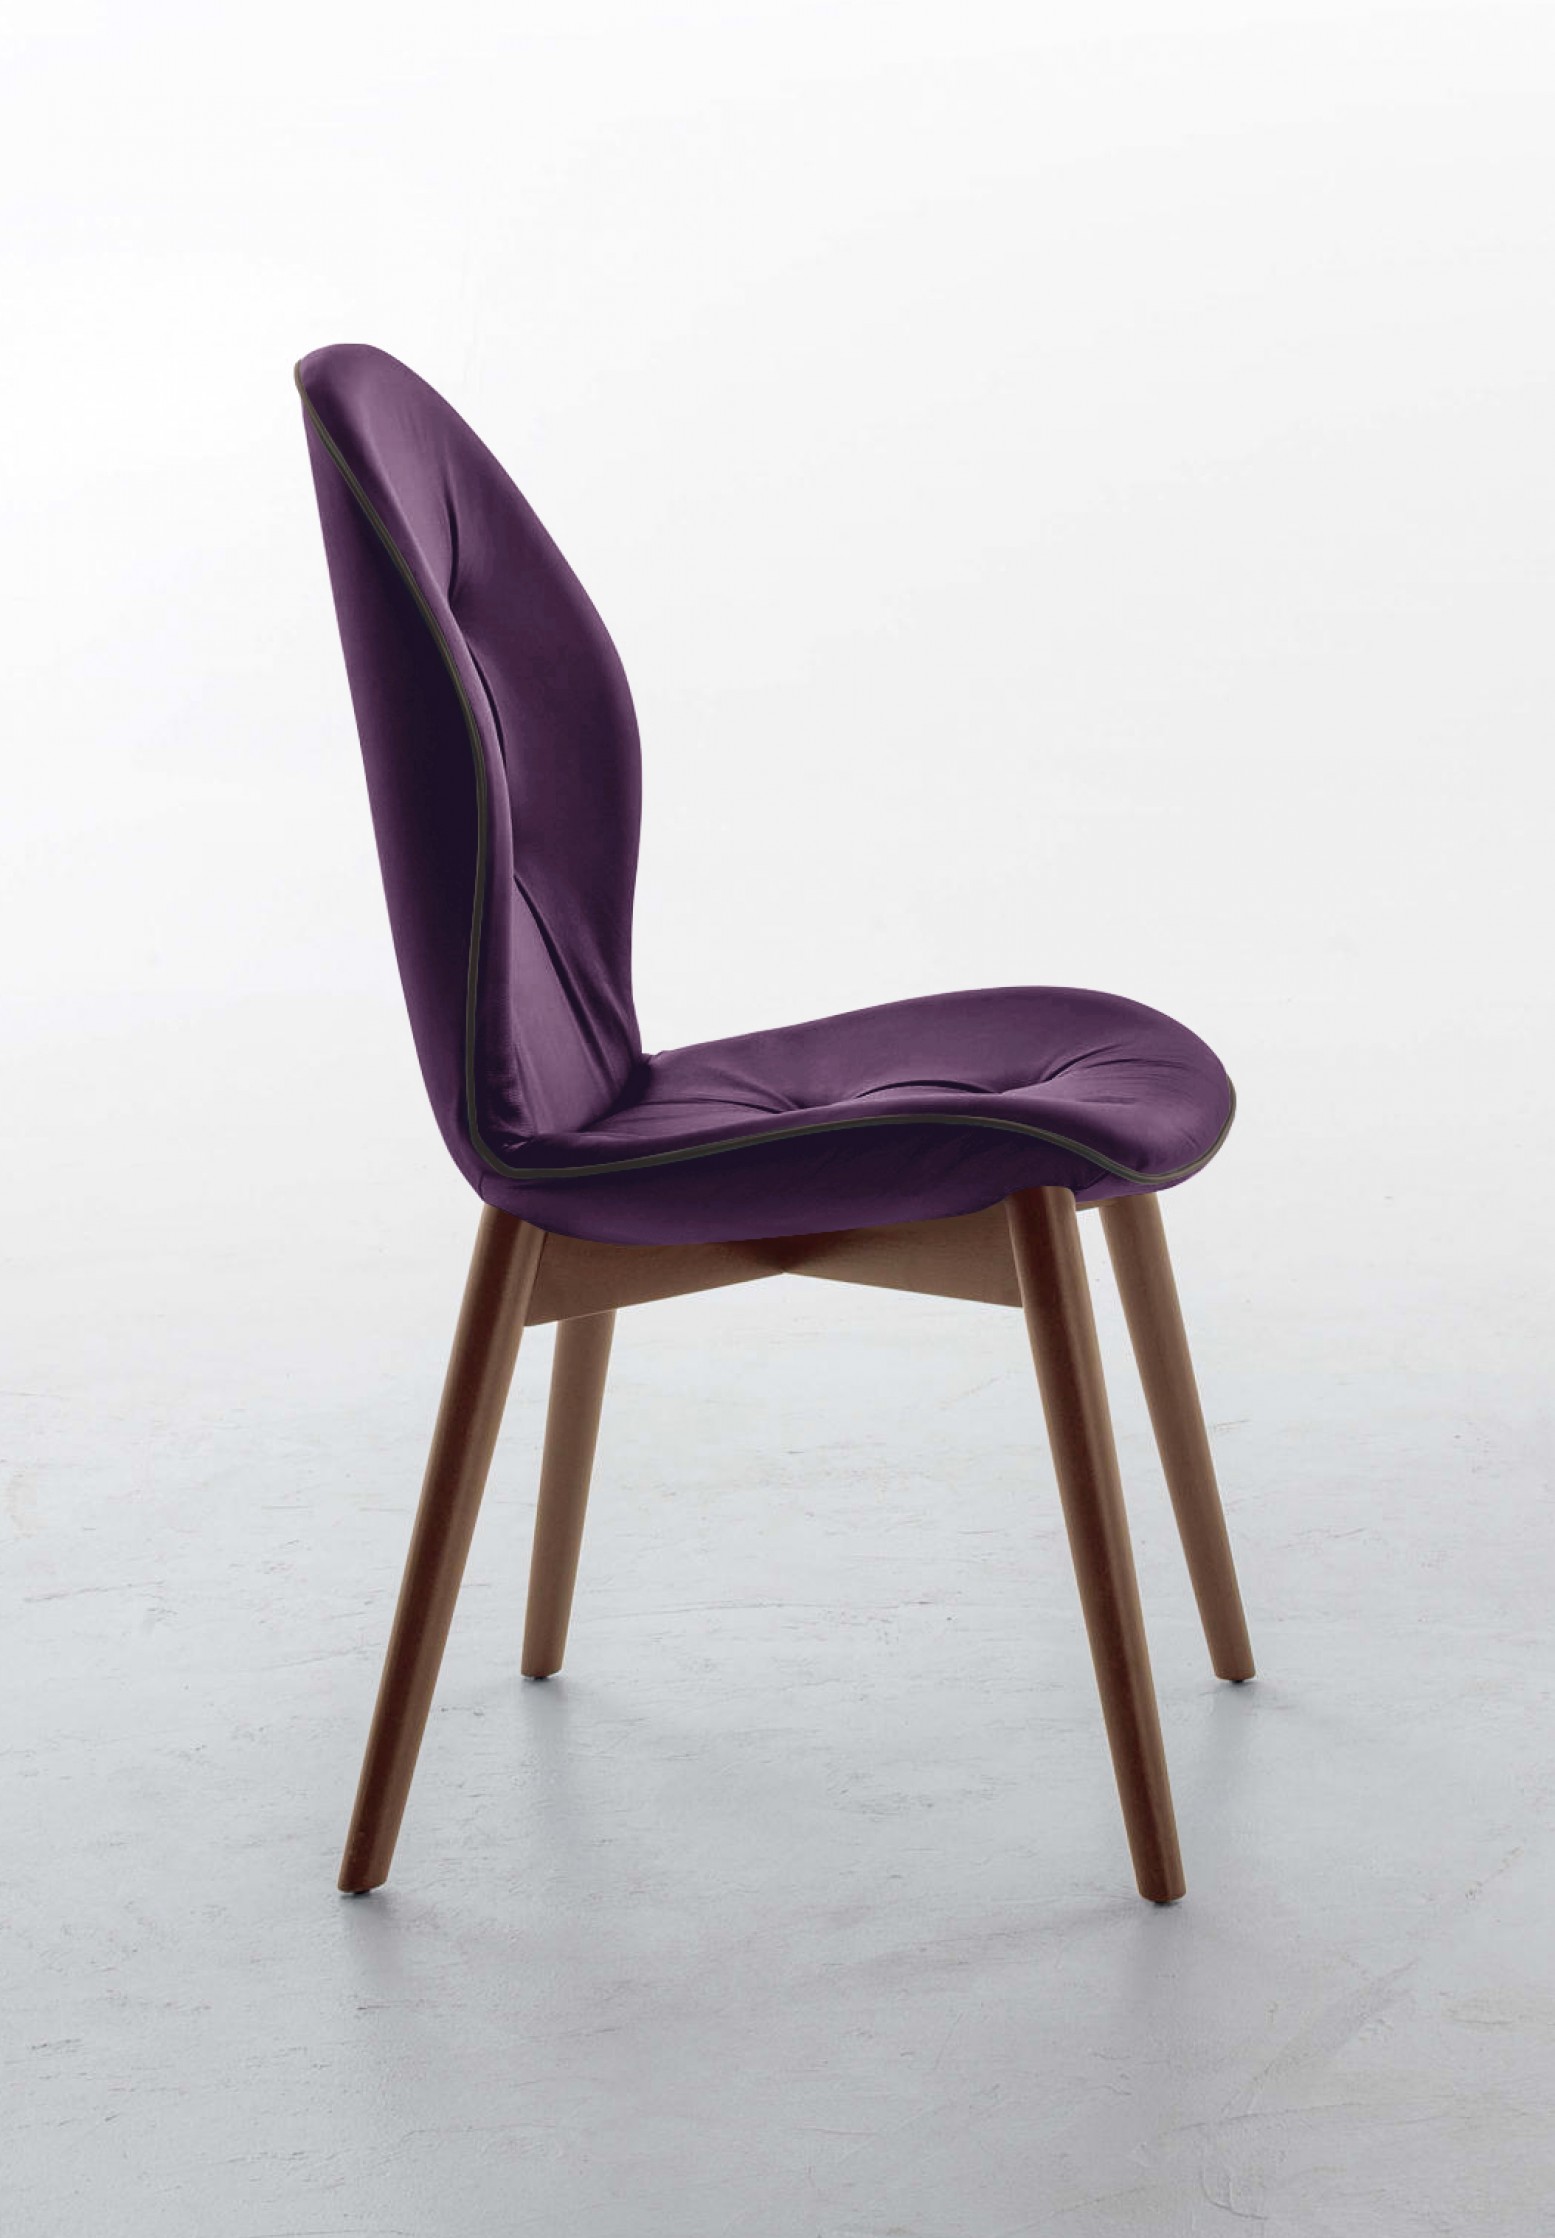 Sorrento Dining Chair Canaletto Walnut Wood Base Aubergine Purple Eco Leather Upholstery Dark Brown Creasing Buy Online At Best Price